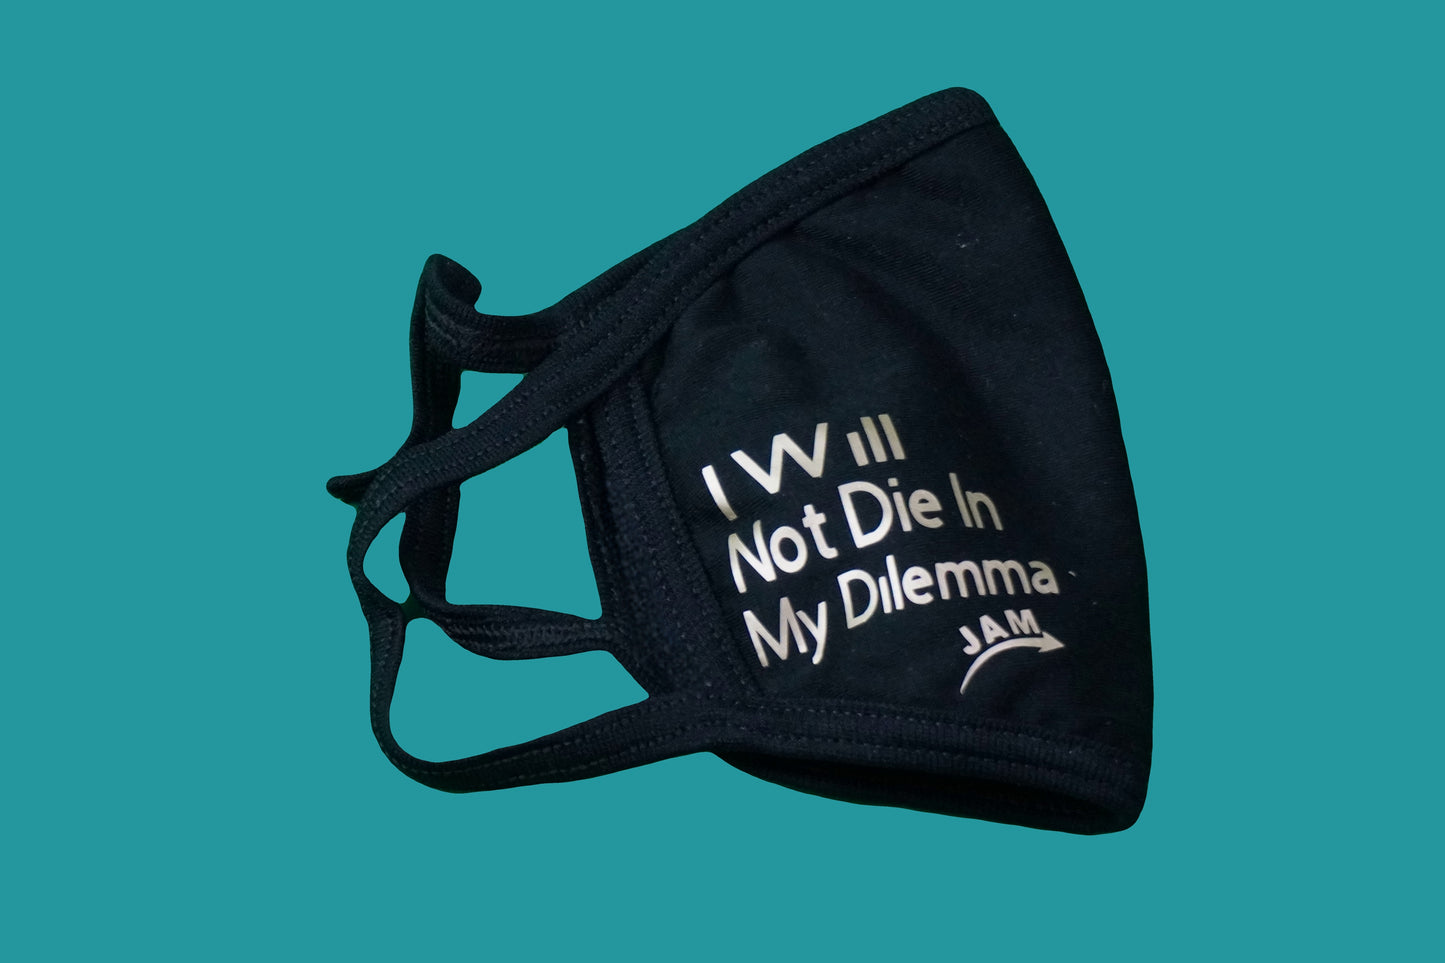 Mask - I Will Not Die In My Dilemma  $5